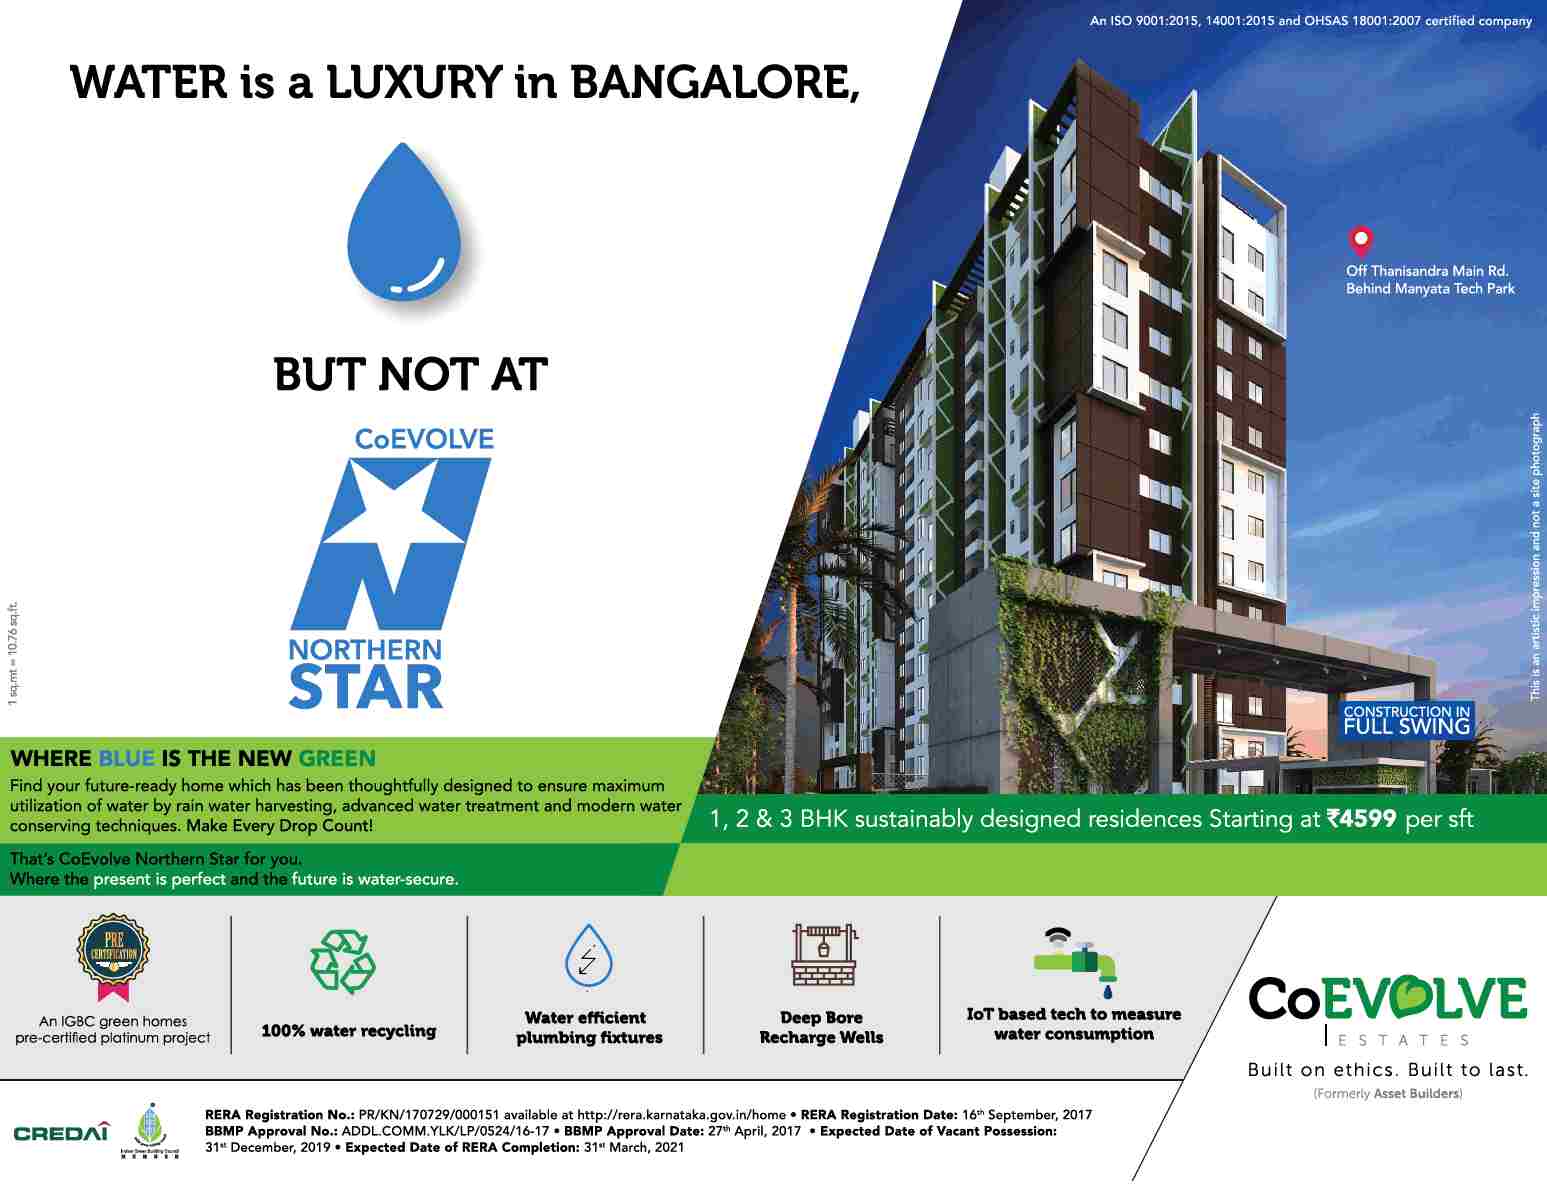 Book sustainably designed residences starting @ 4599 per sqft at CoEvolve Northern Star in Bangalore Update